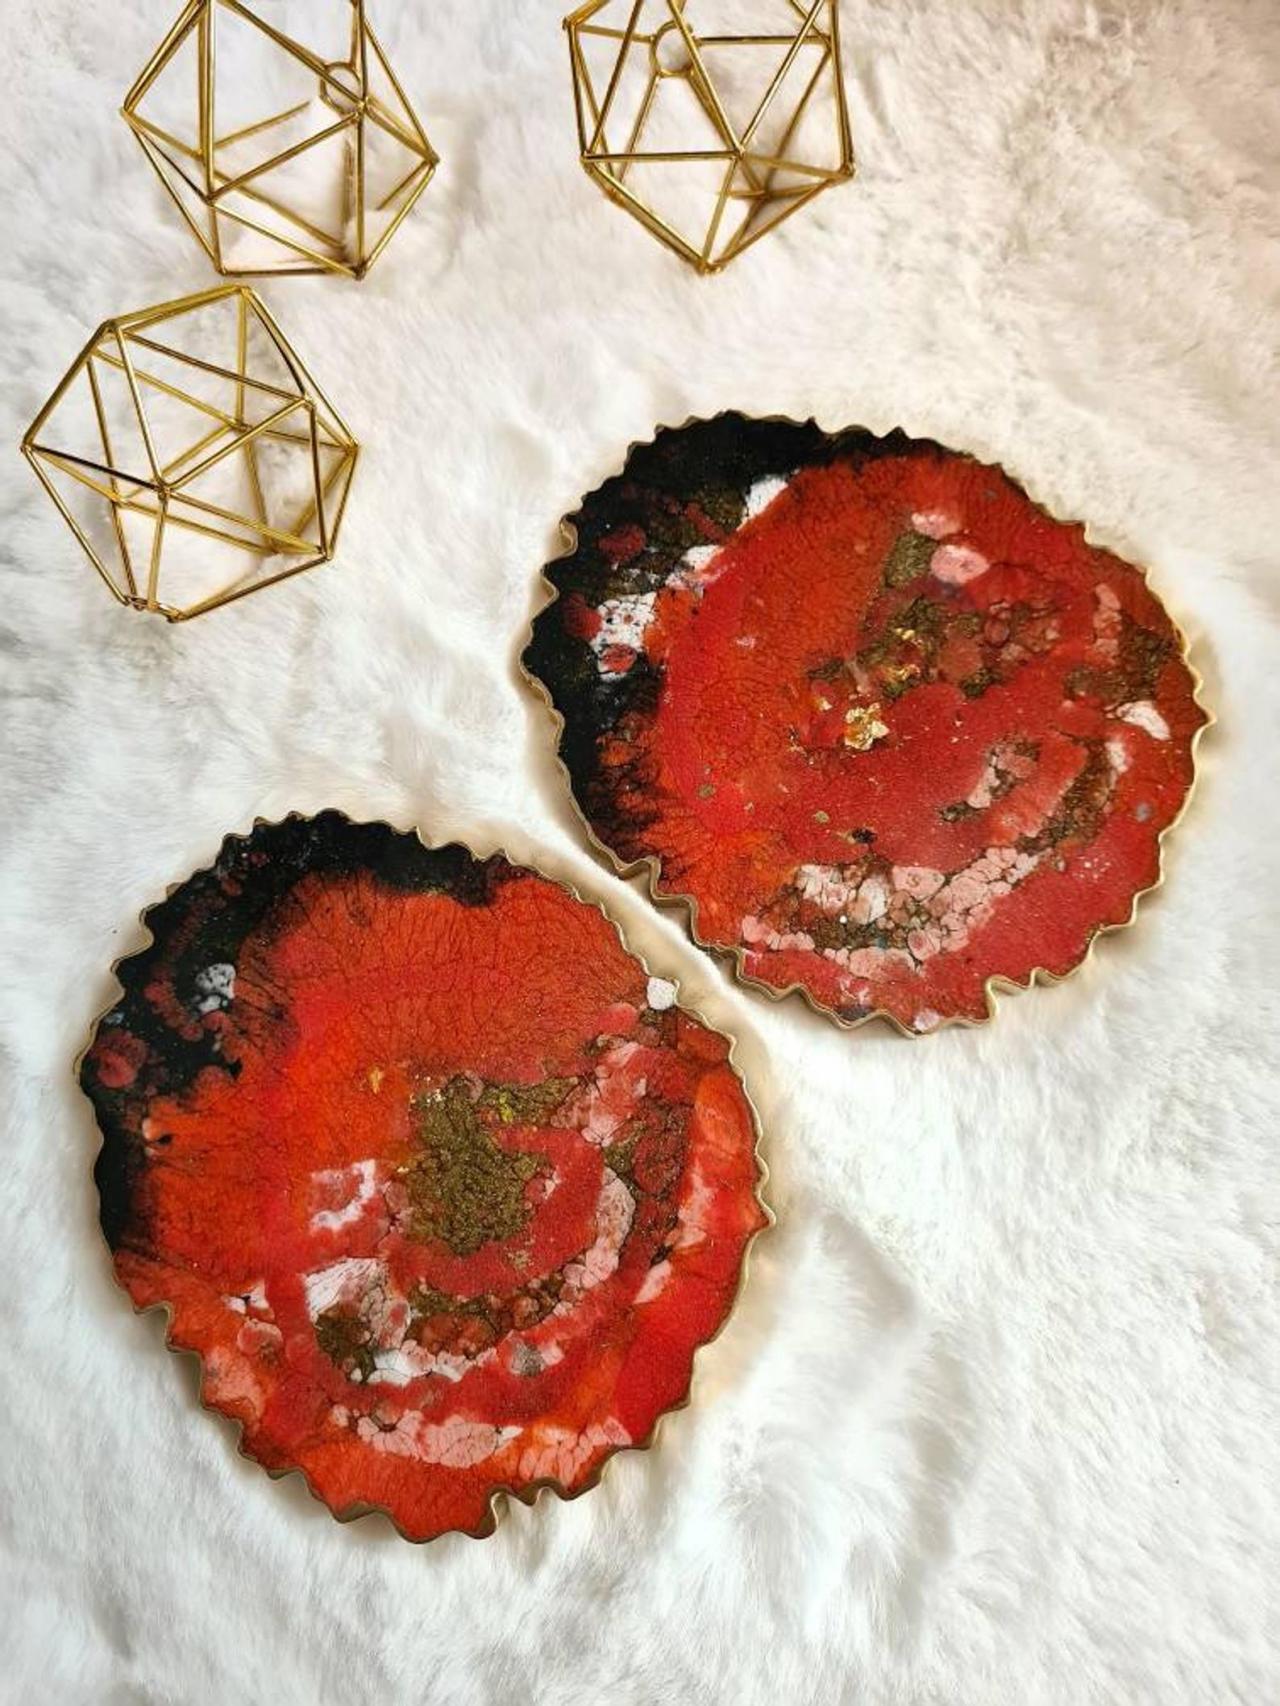 Orange Coasters With Black, White & Gold / 2 Sided Coasters With Flower Of Life Design / Great For Gifts - Set Of 2